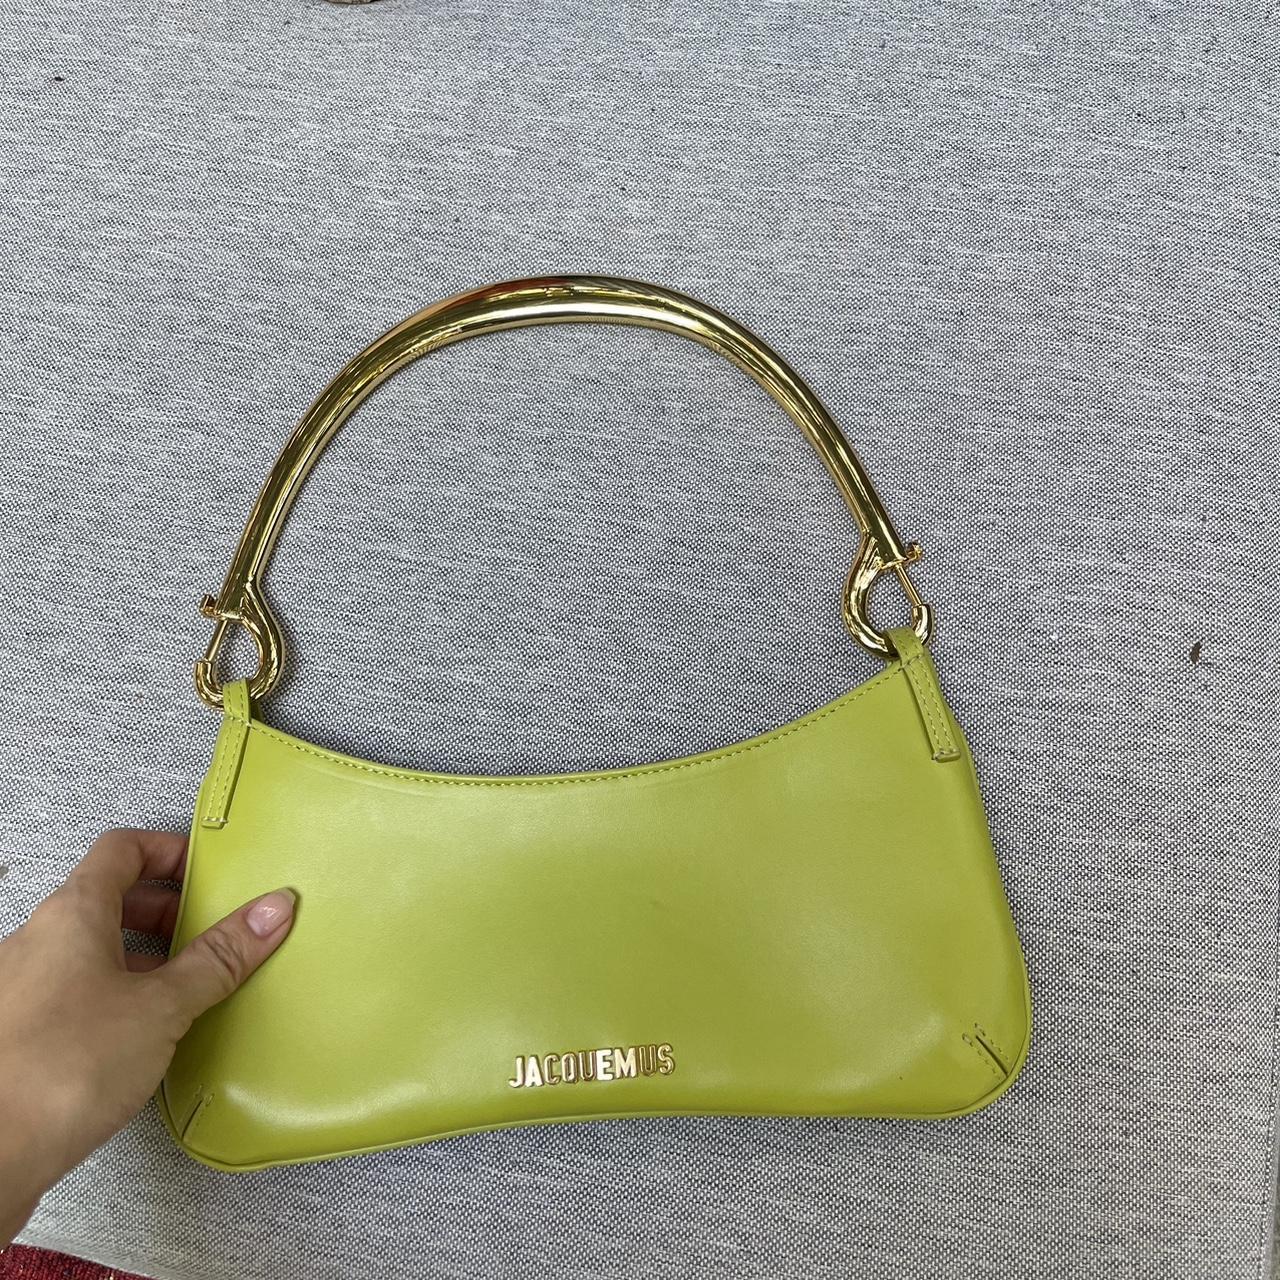 Jacquemus Women's Green and Gold Bag (5)